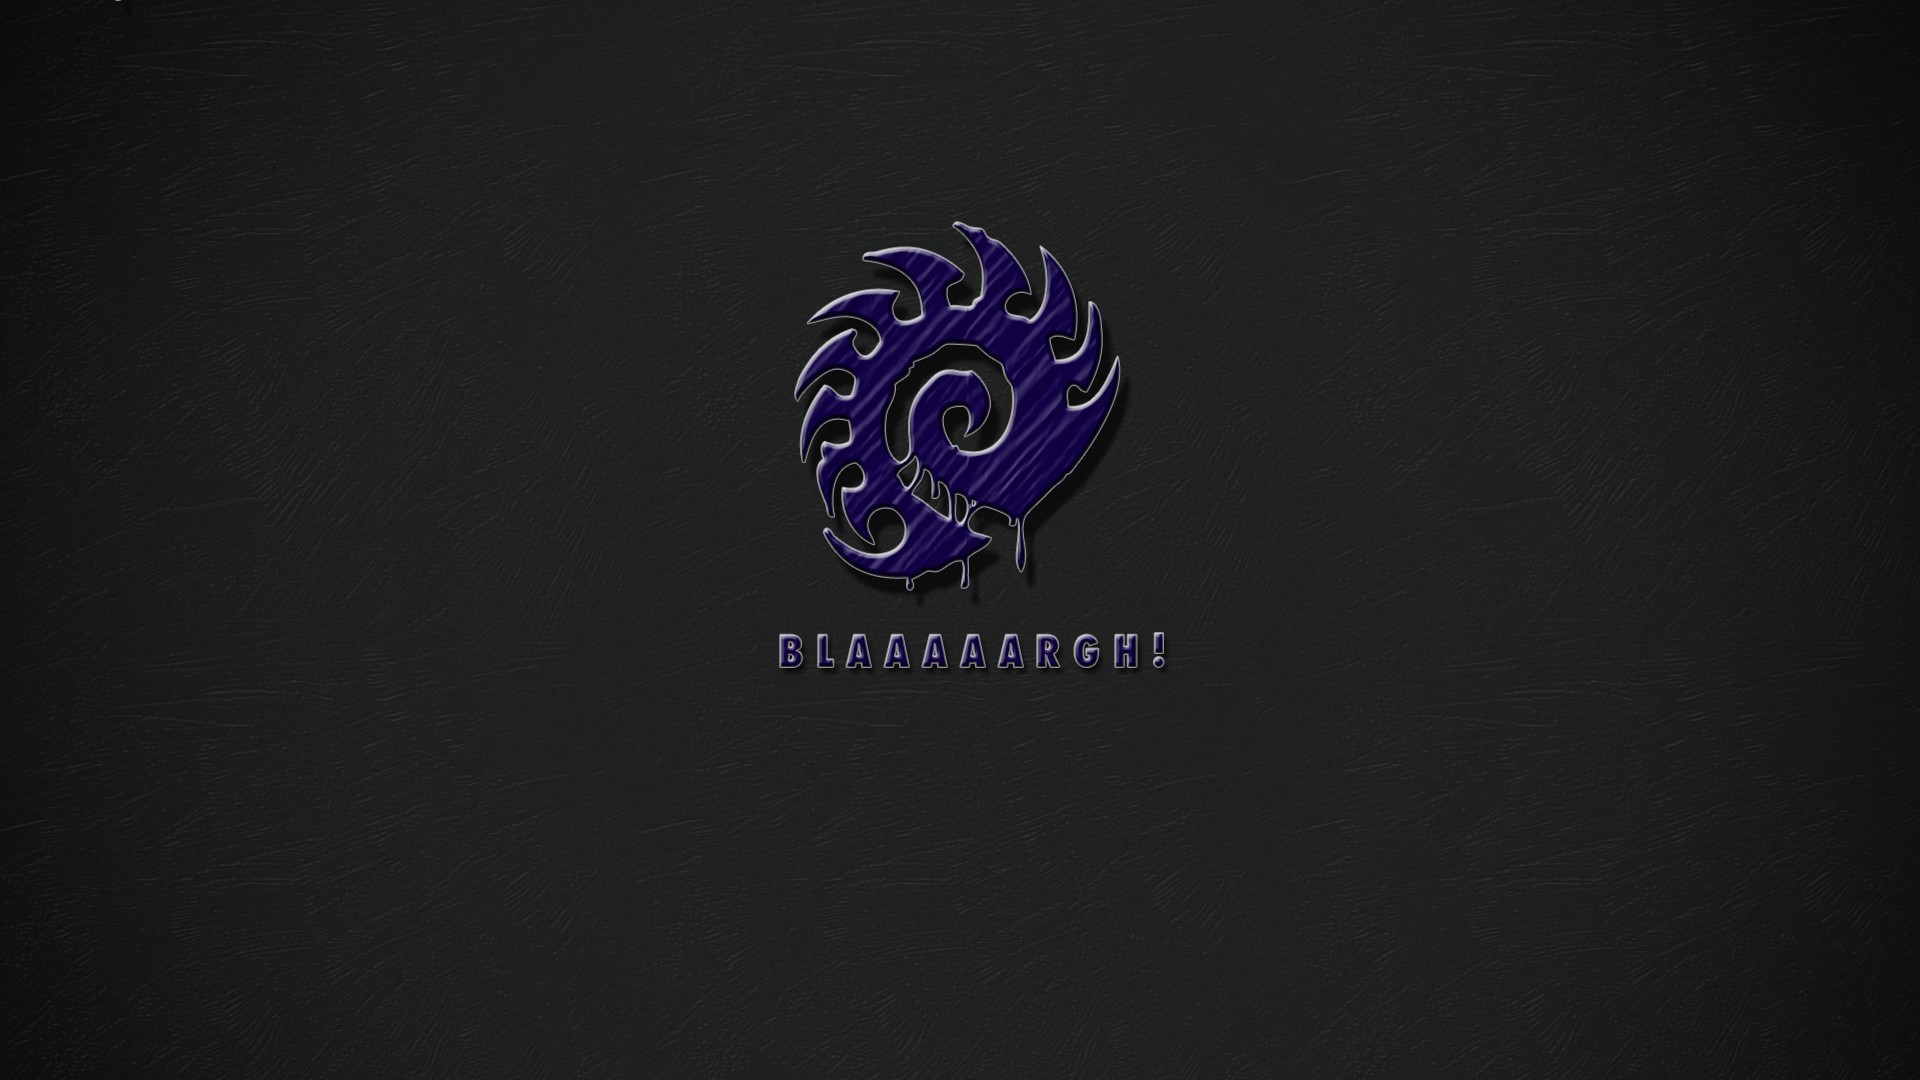 1920x1080 Inspired by the Protoss wallpaper I decided to try make one for Zerg.